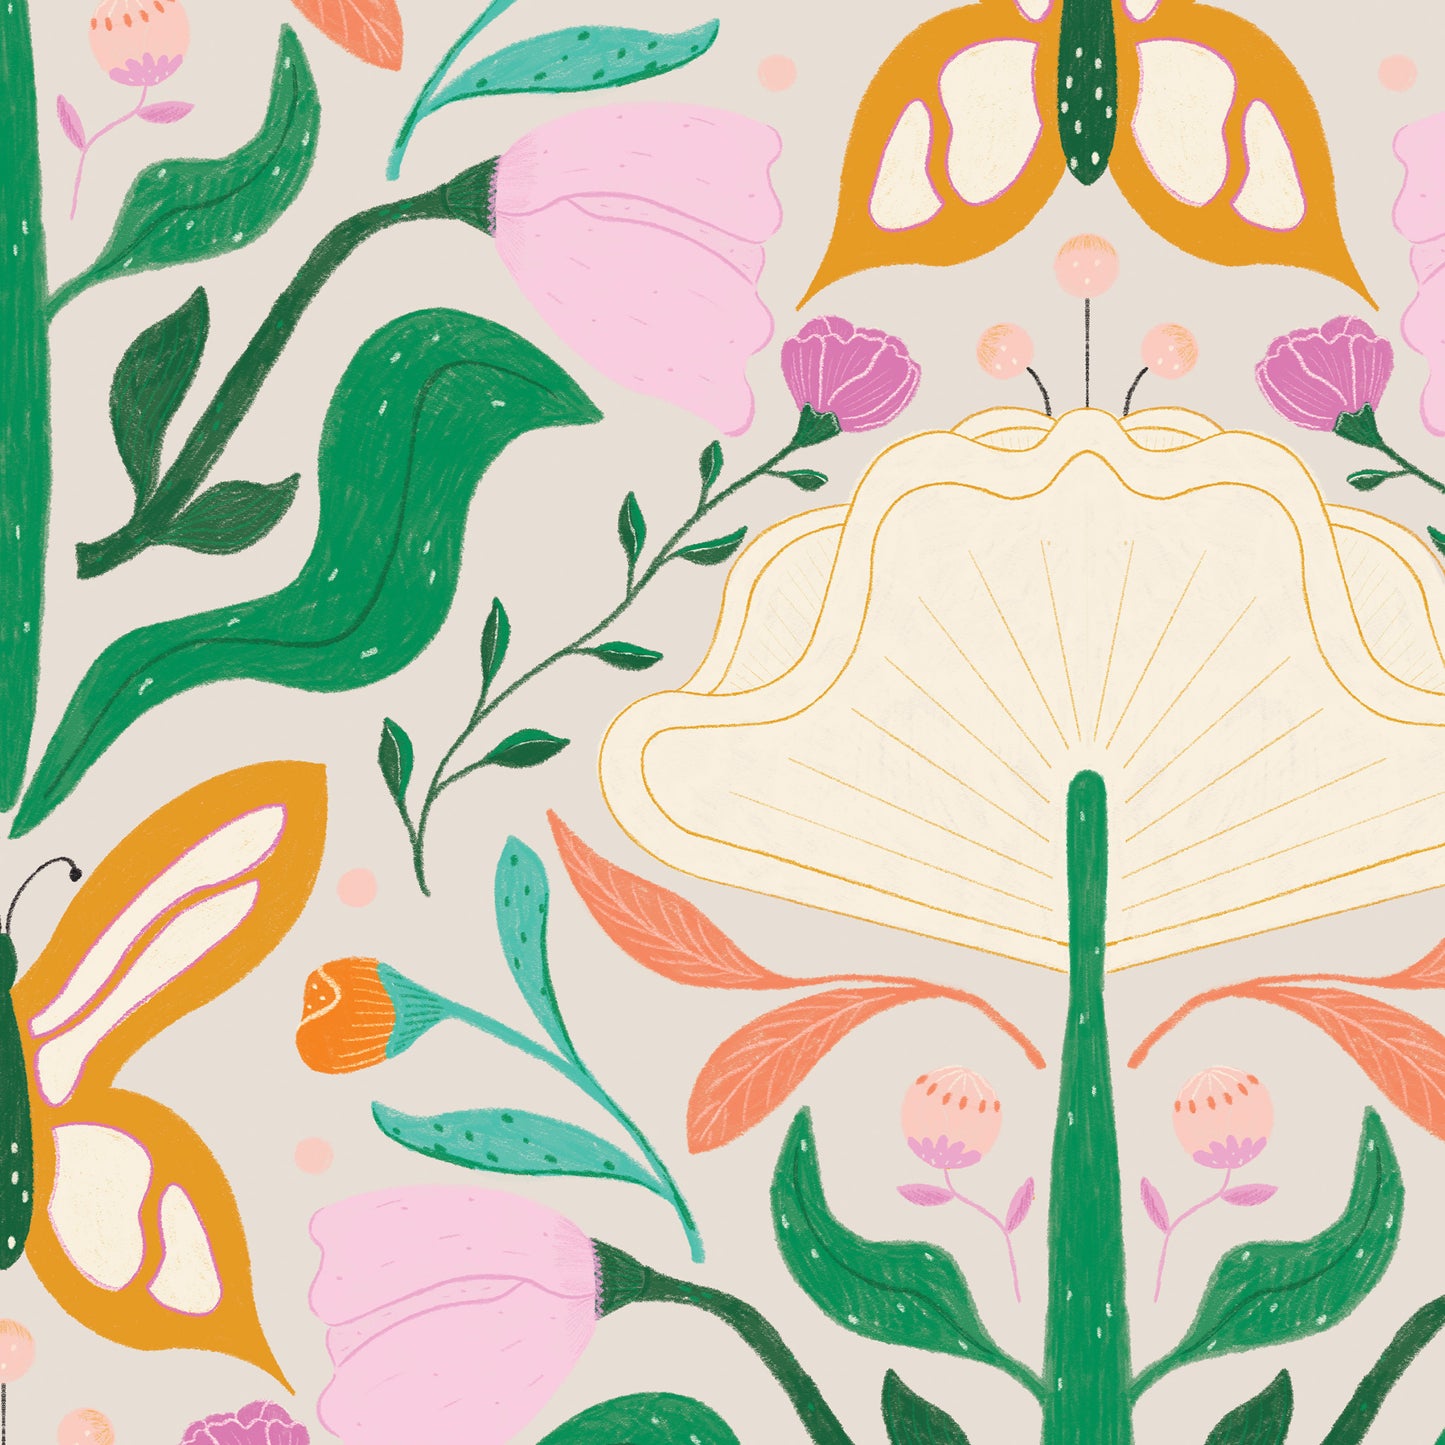 Closeup featuring our Floral Damask Wallpaper in Bright colors by artist Brenda Bird for Ayara